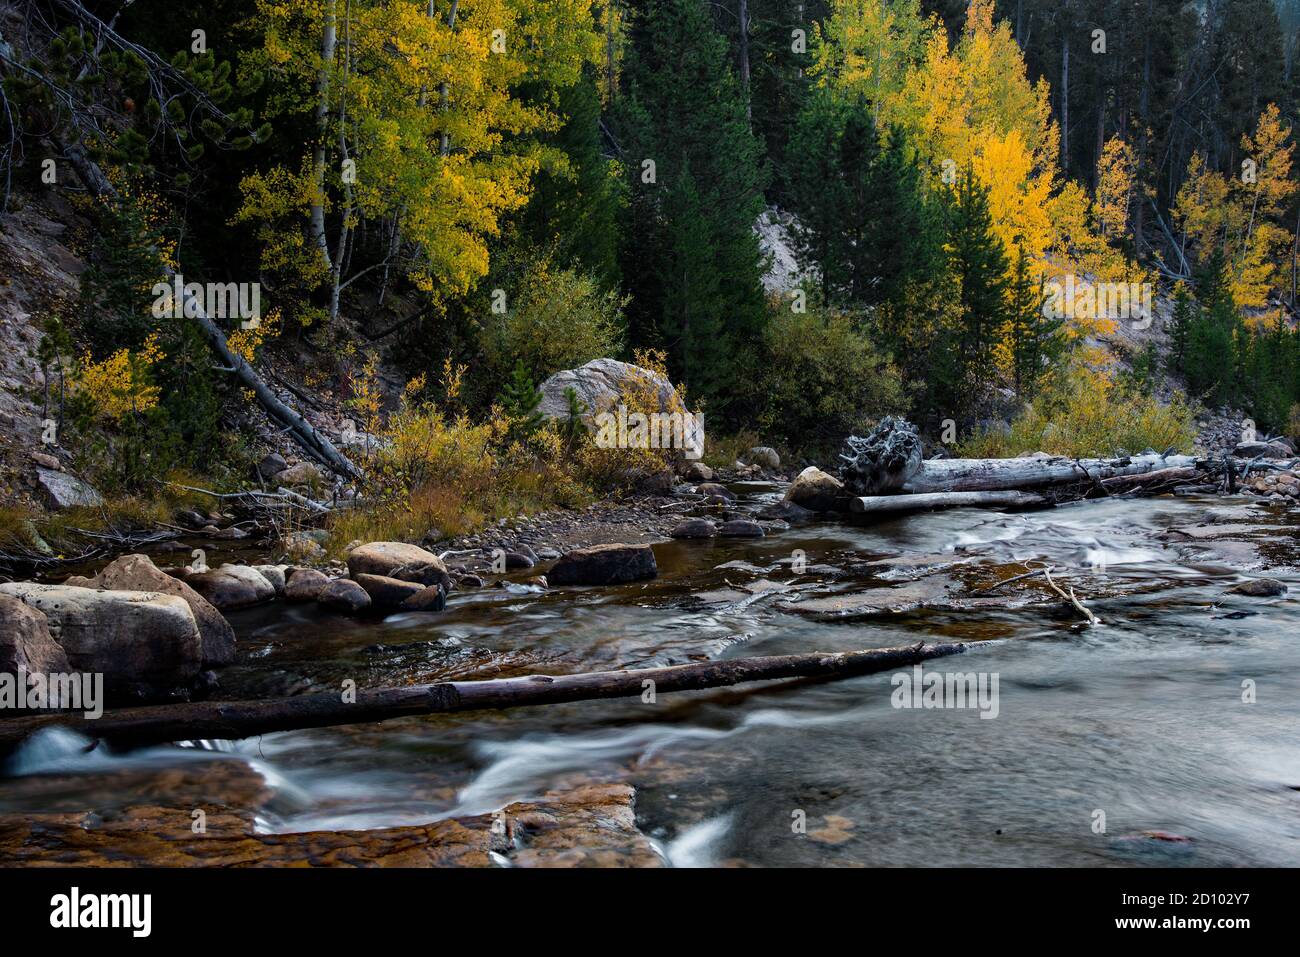 Gently flowing stream in the high mountains of Utah.  The Upper Provo River, in the Uinta Mountains, is located in the northeastern part of the state. Stock Photo